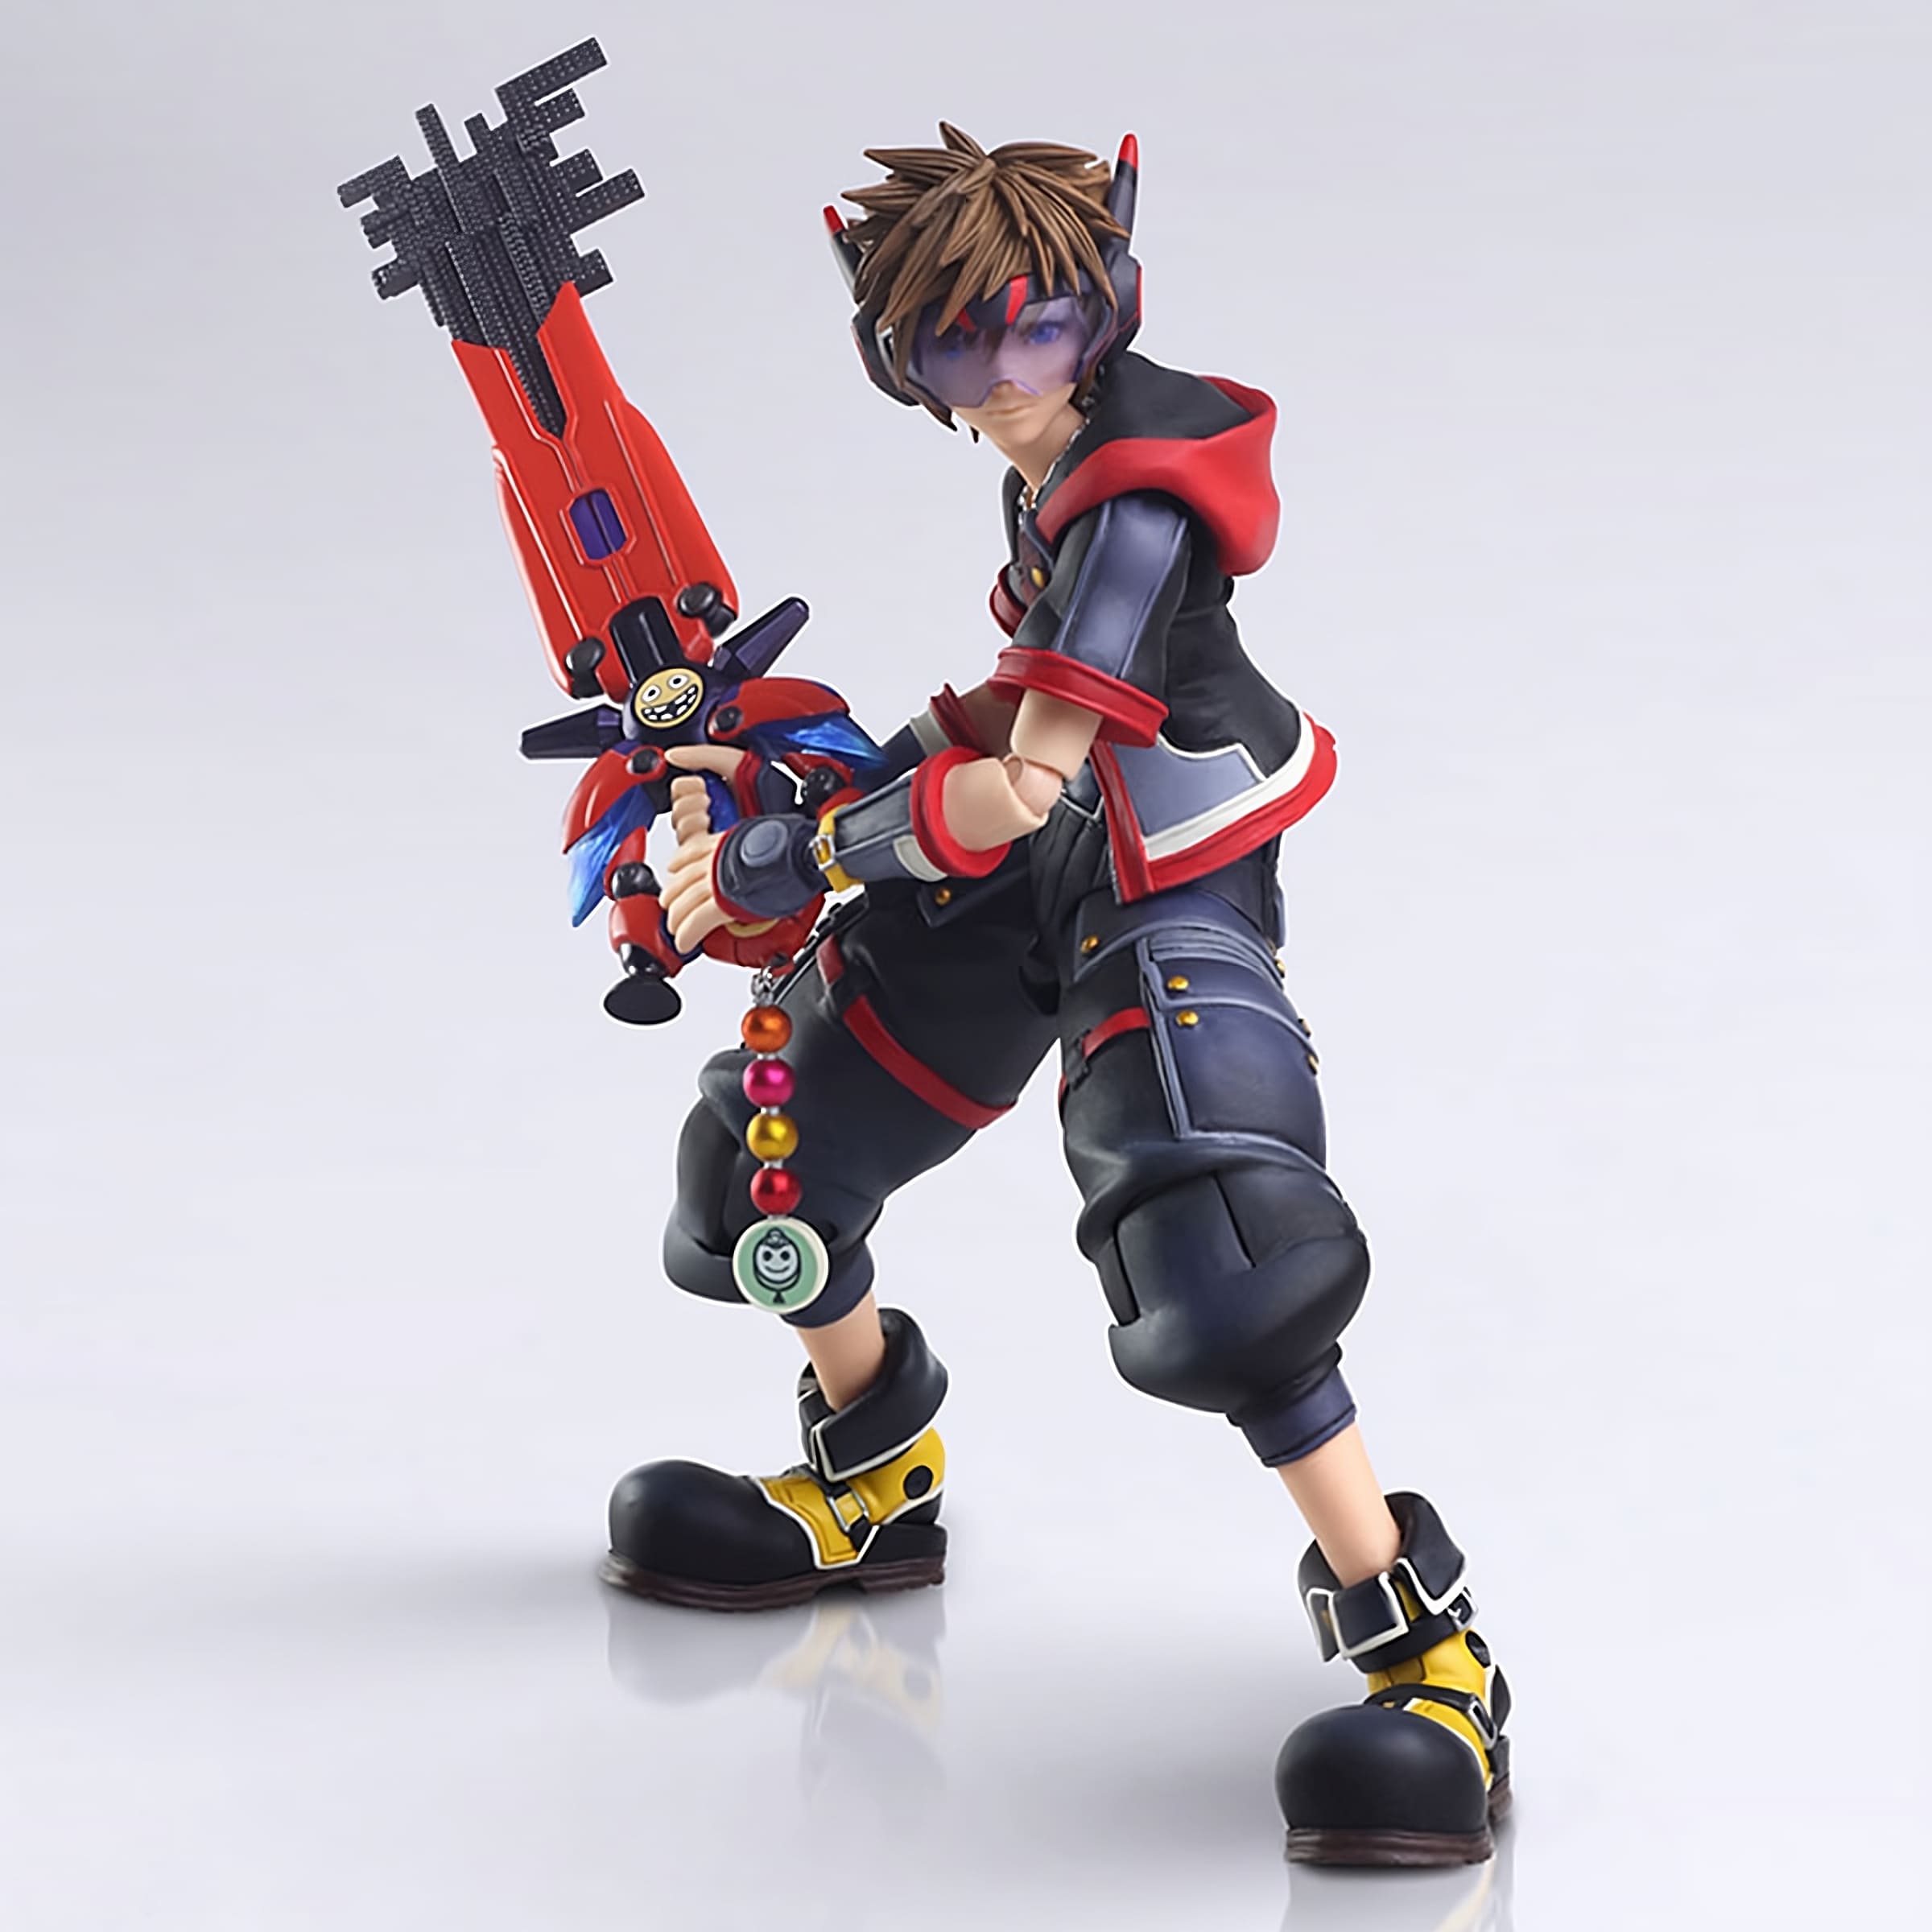 Kingdom Hearts,  Sora,  Action Figure,  Toy,  Collectible,  Square Enix,  Disney,  RPG,  Video Game,  Keyblade Master